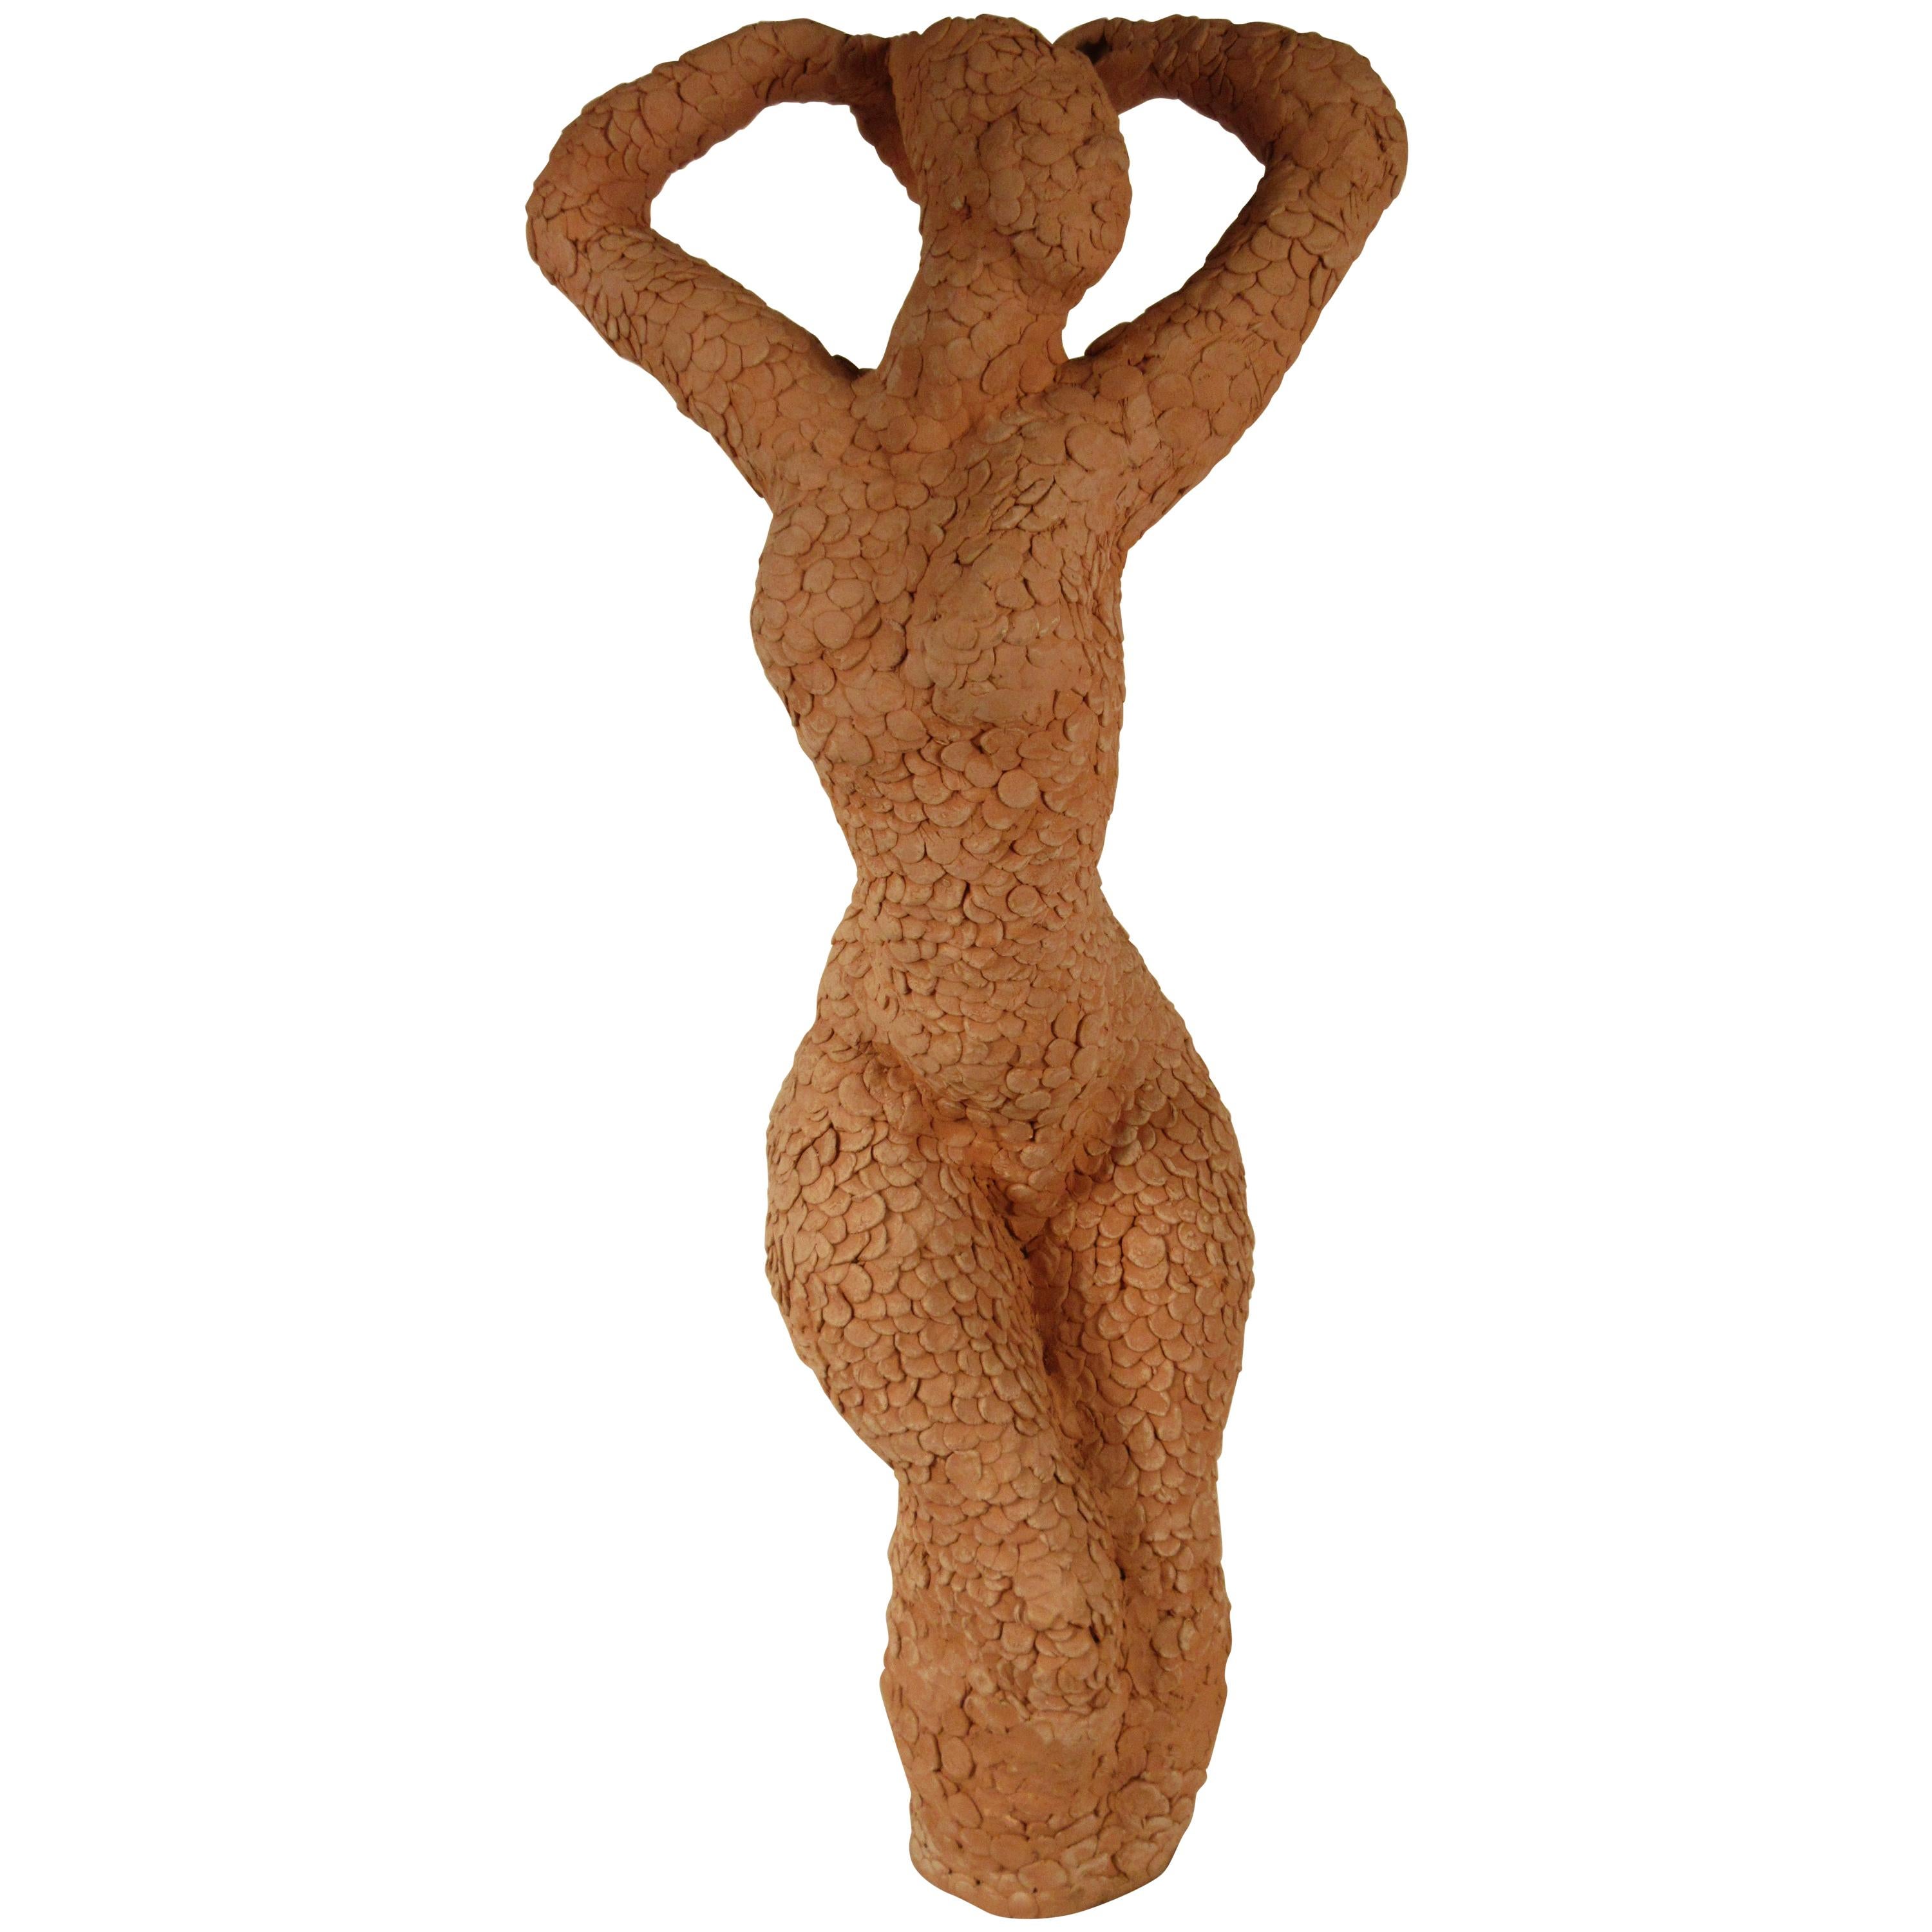 1960s Textured Clay Sculpture of Nude Woman